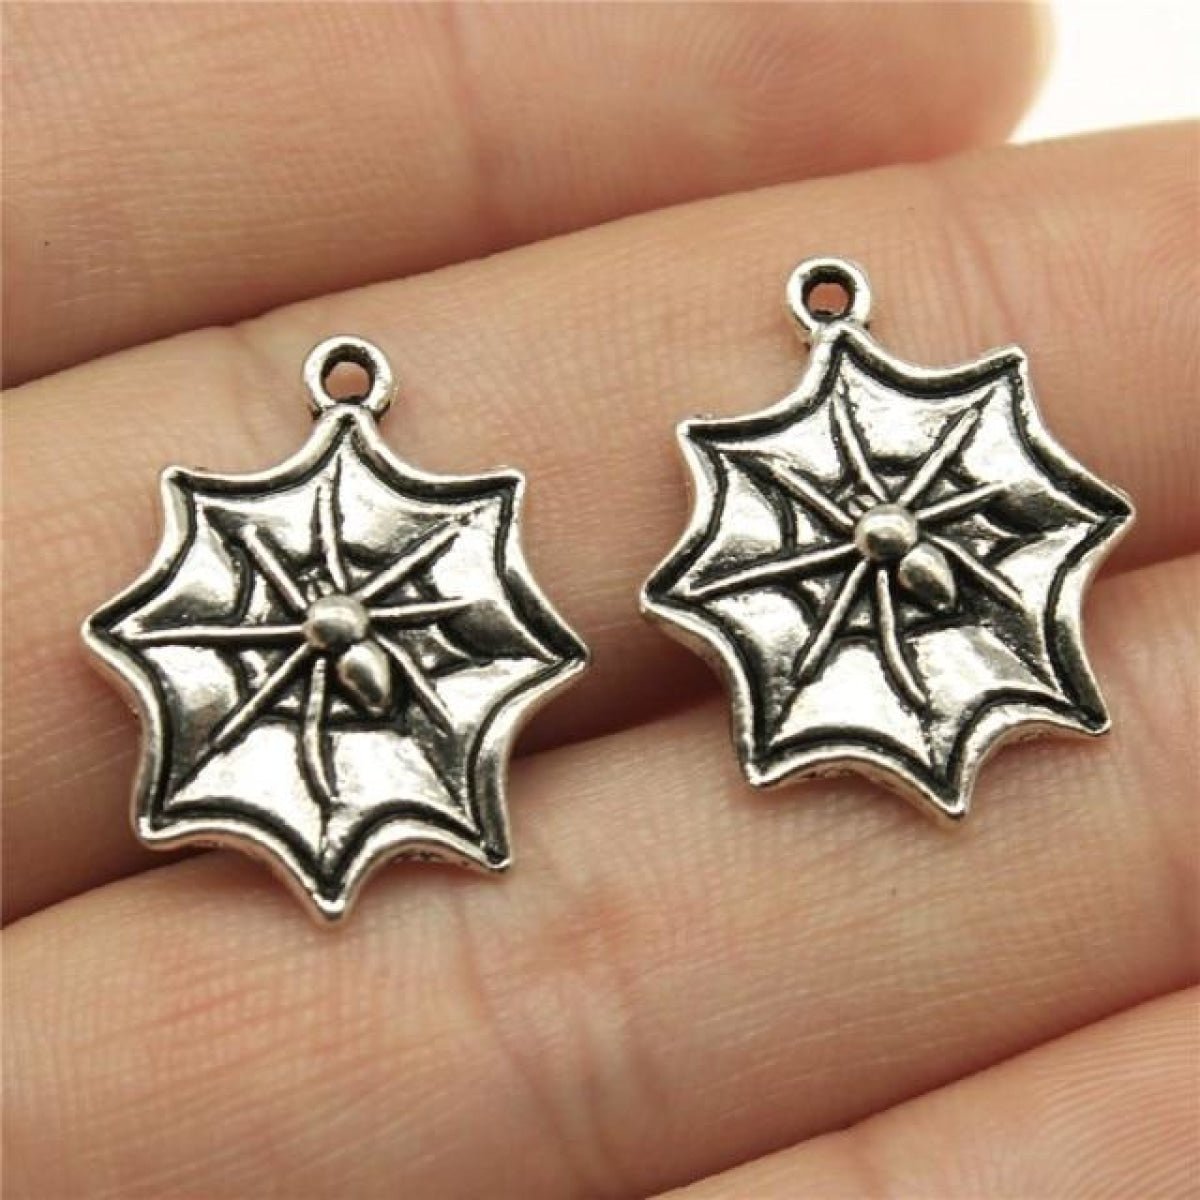 4pcs Spider Charms Antique Silver Colour Spider Charms Pendants For Bracelets Spider Cobweb Charms Making Jewellery - H - - Asia Sell